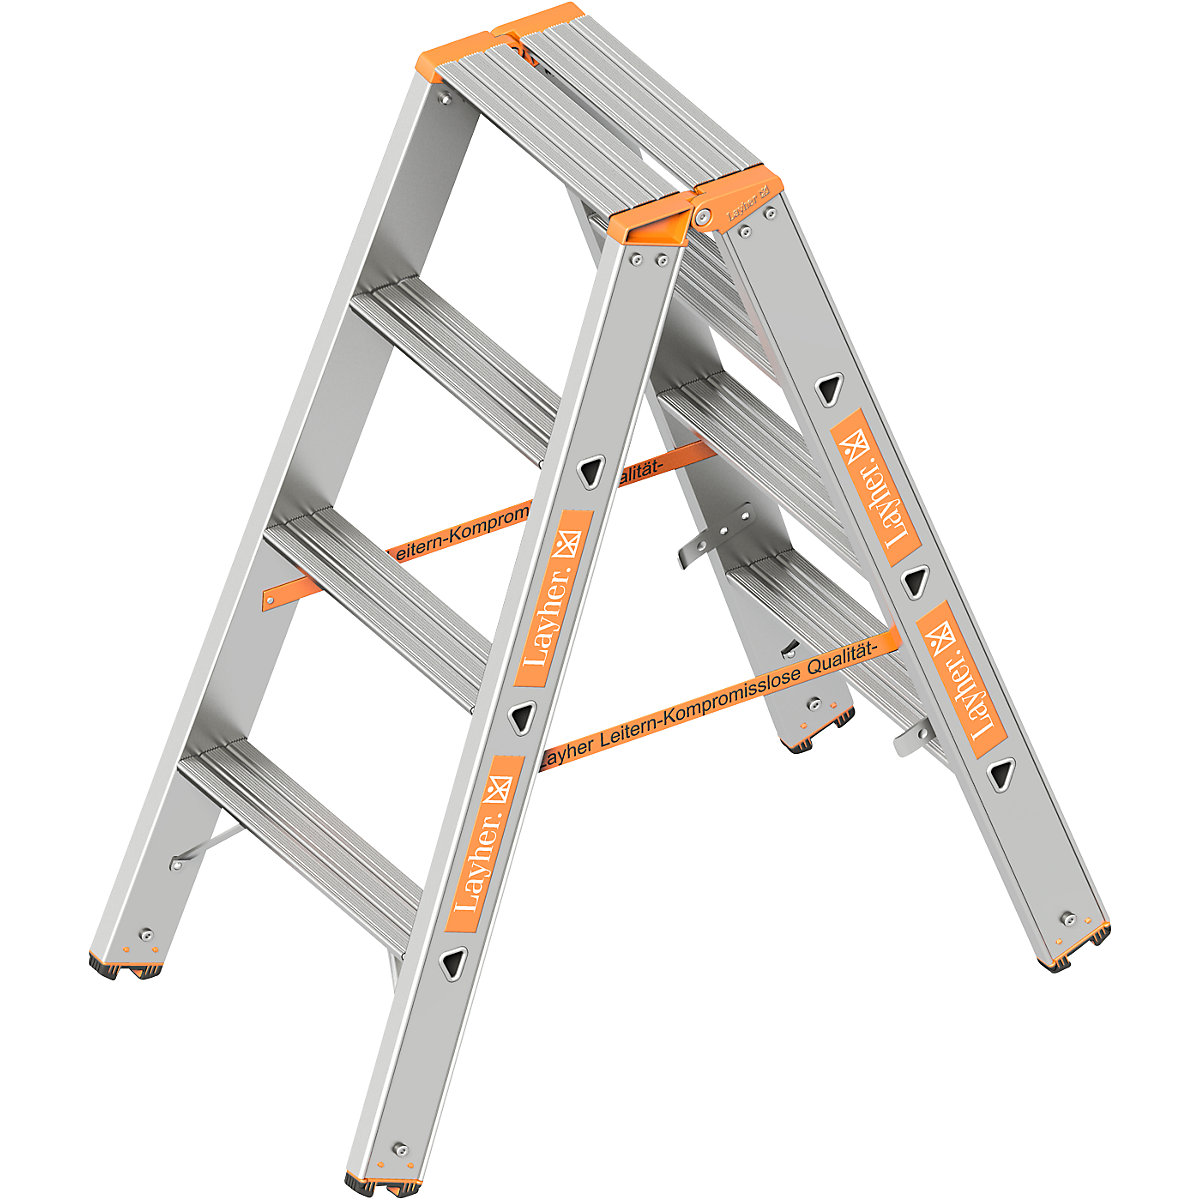 Step ladder – Layher, double sided access, 2 x 4 steps-7